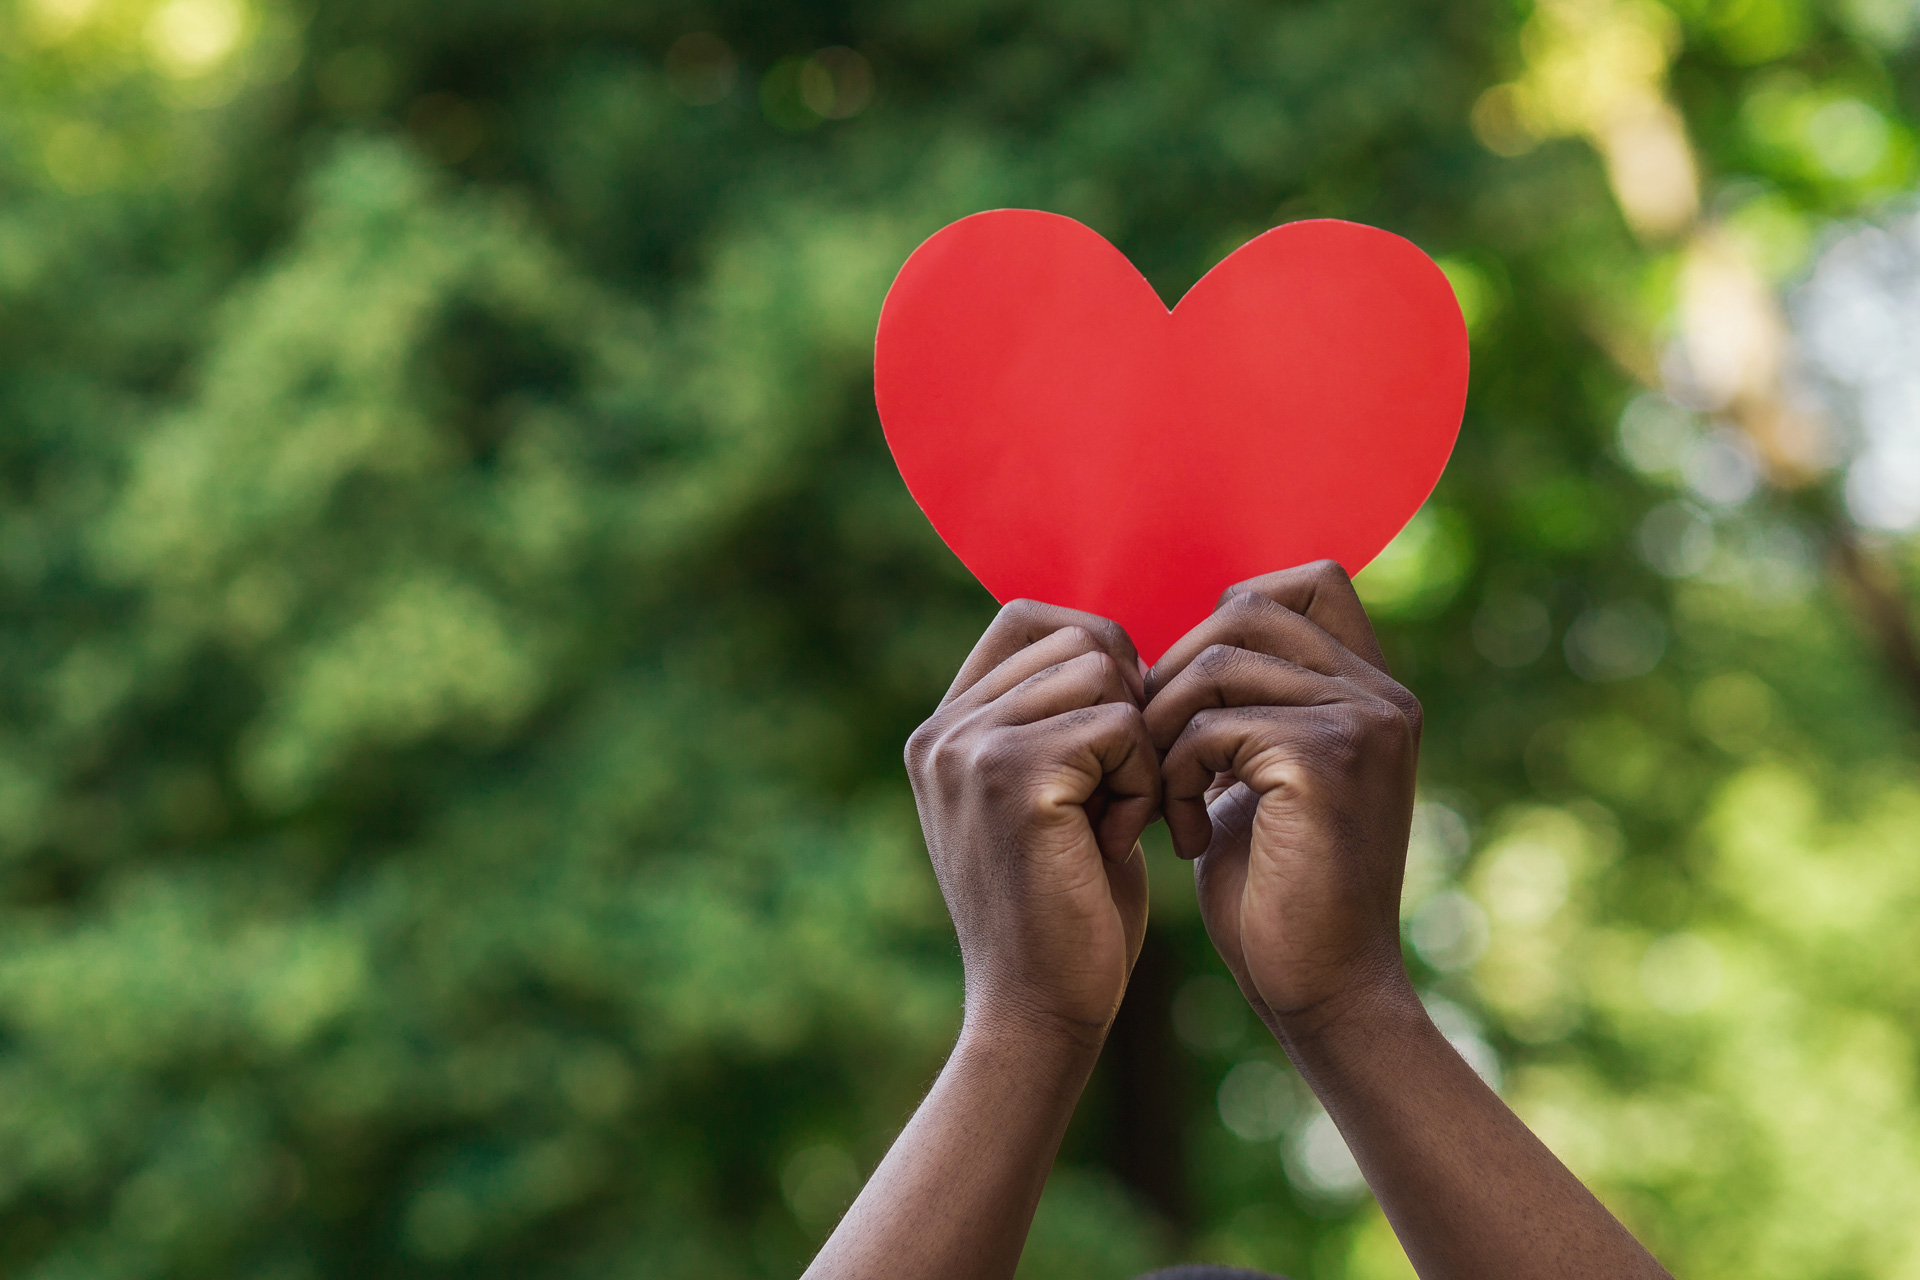 Hands holding up a red heart against a green background